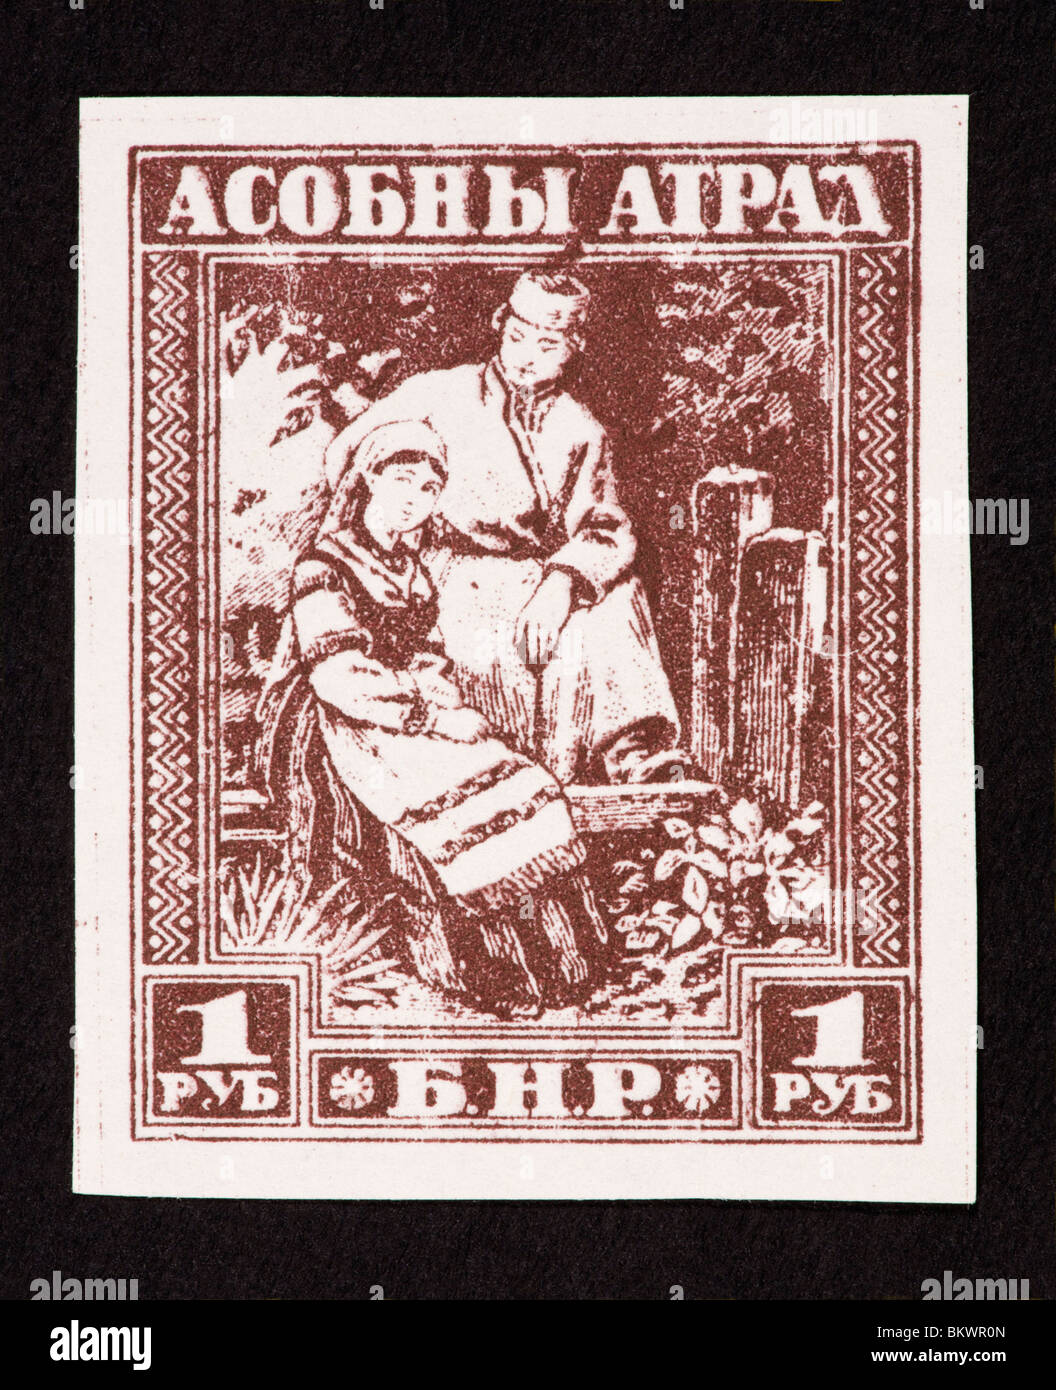 Propaganda label from White Russia (Belarus) depicting man and a woman or girl. Stock Photo